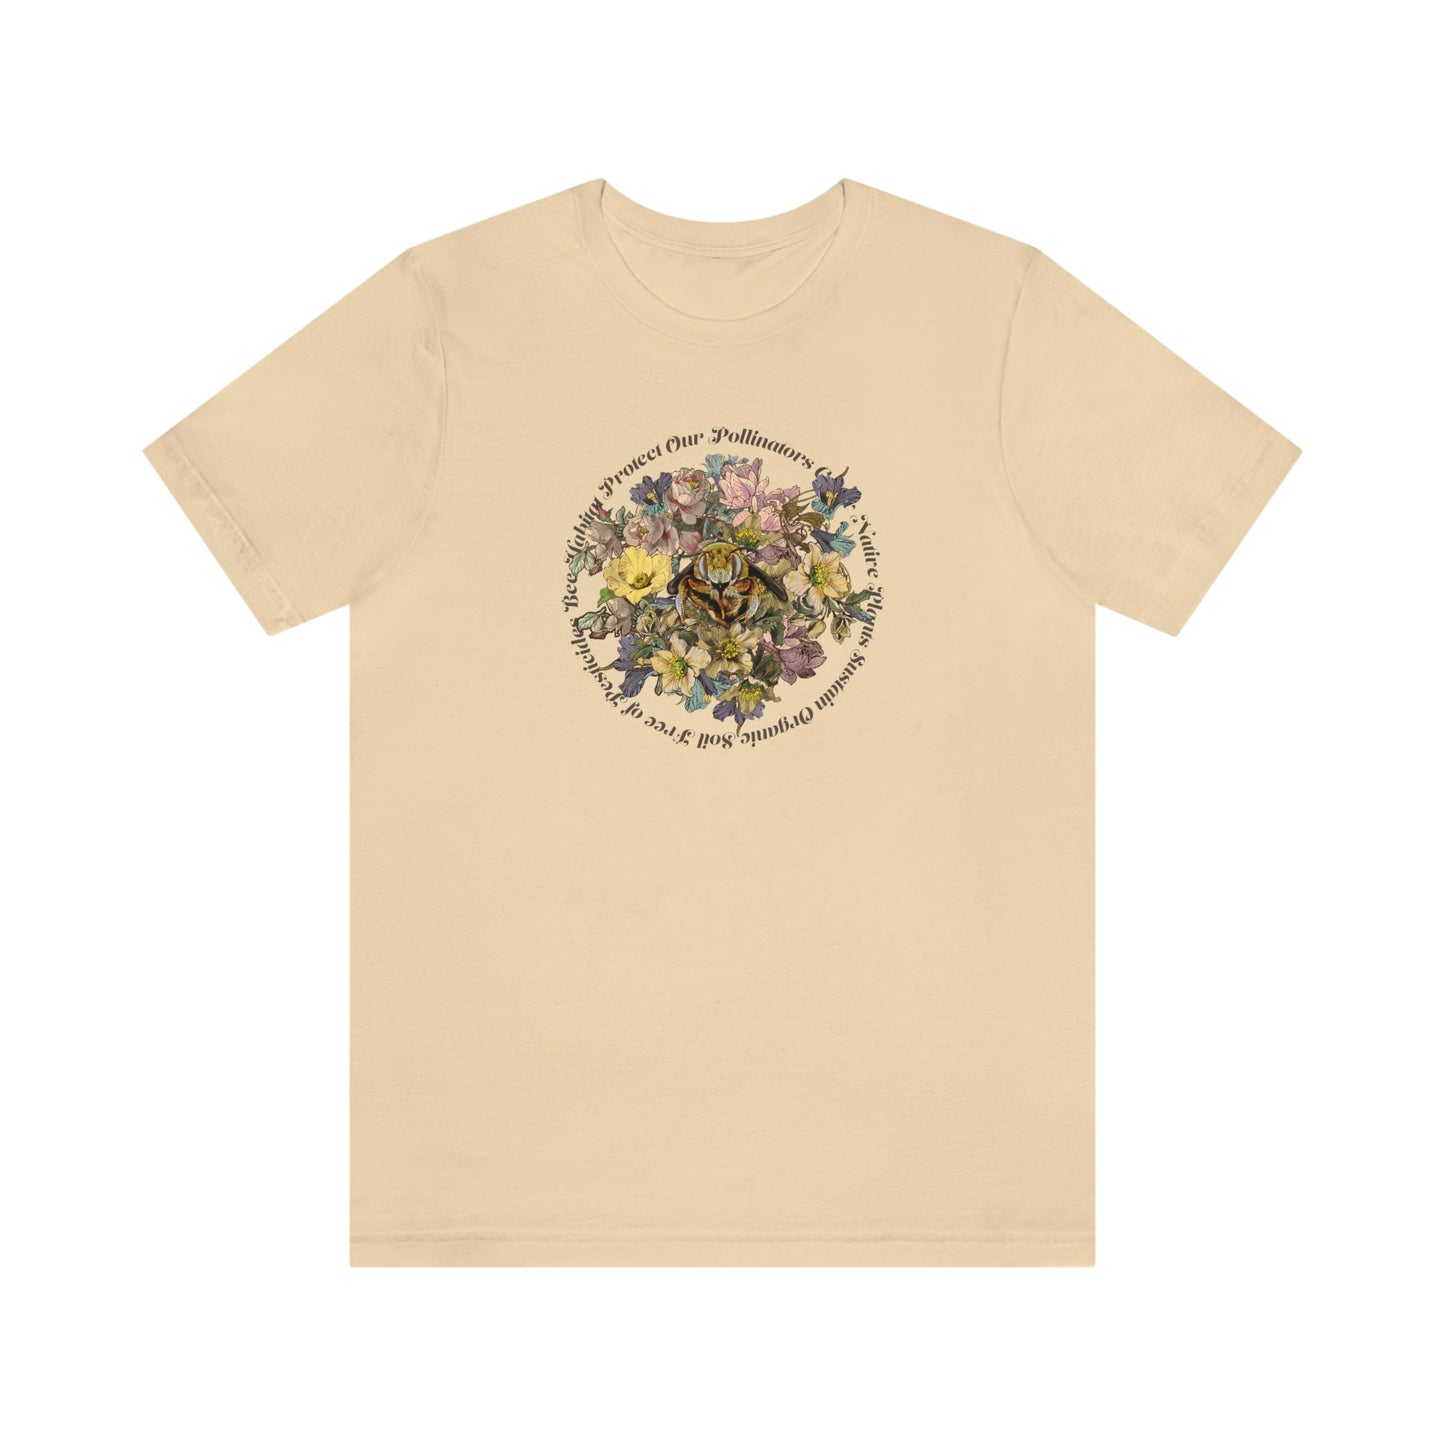 Save Our Pollinators Bee Shirt, Honeybee, Conservation, Environmental, Botanical, Floral, gift for gardener, gift for Mom, naturalist